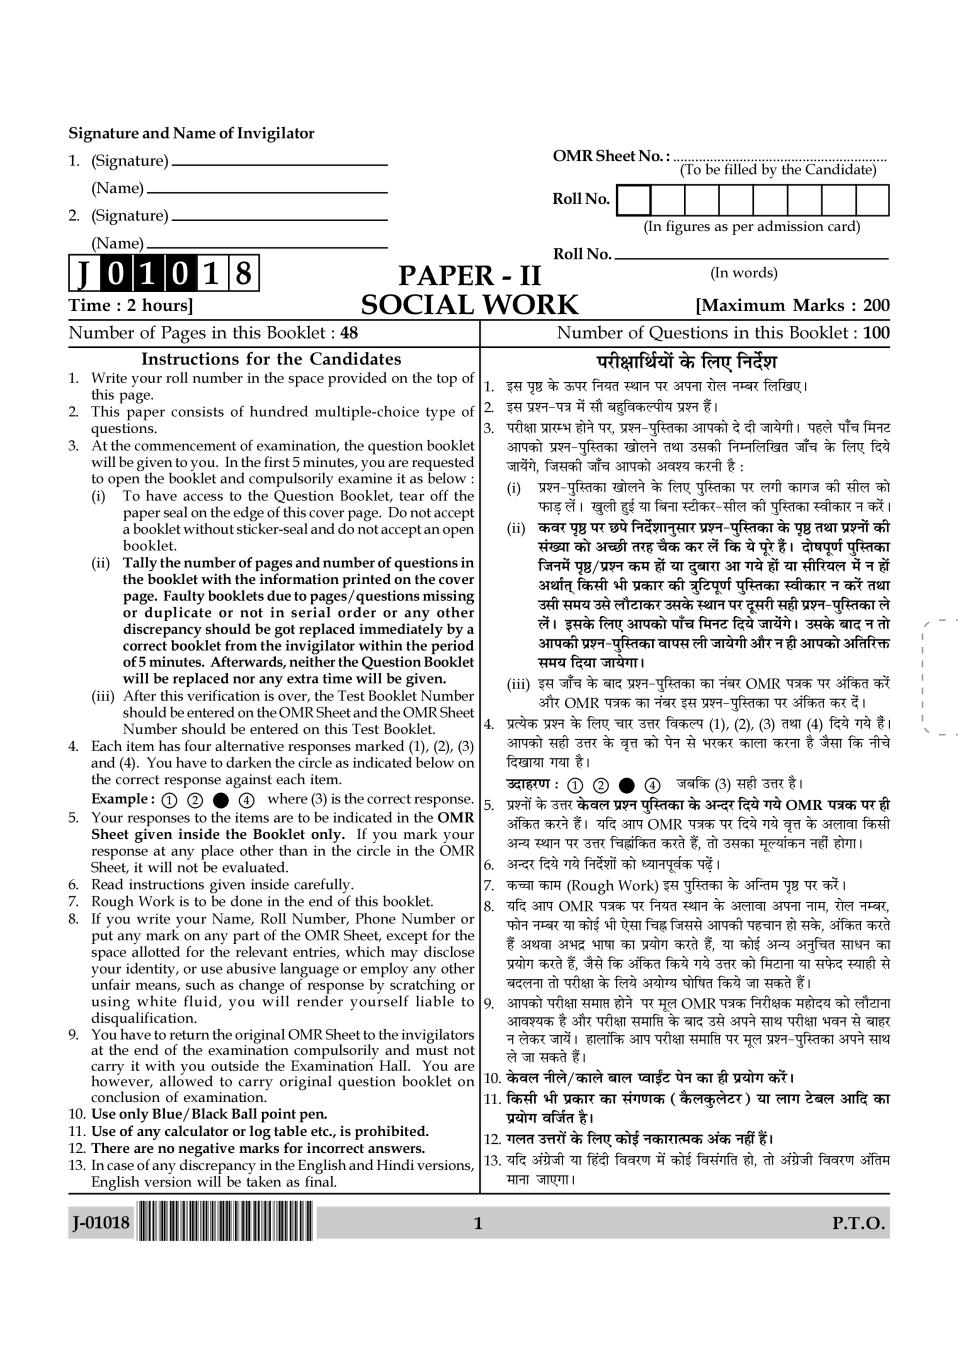 UGC NET Social Work Question Paper 2018 - Page 1